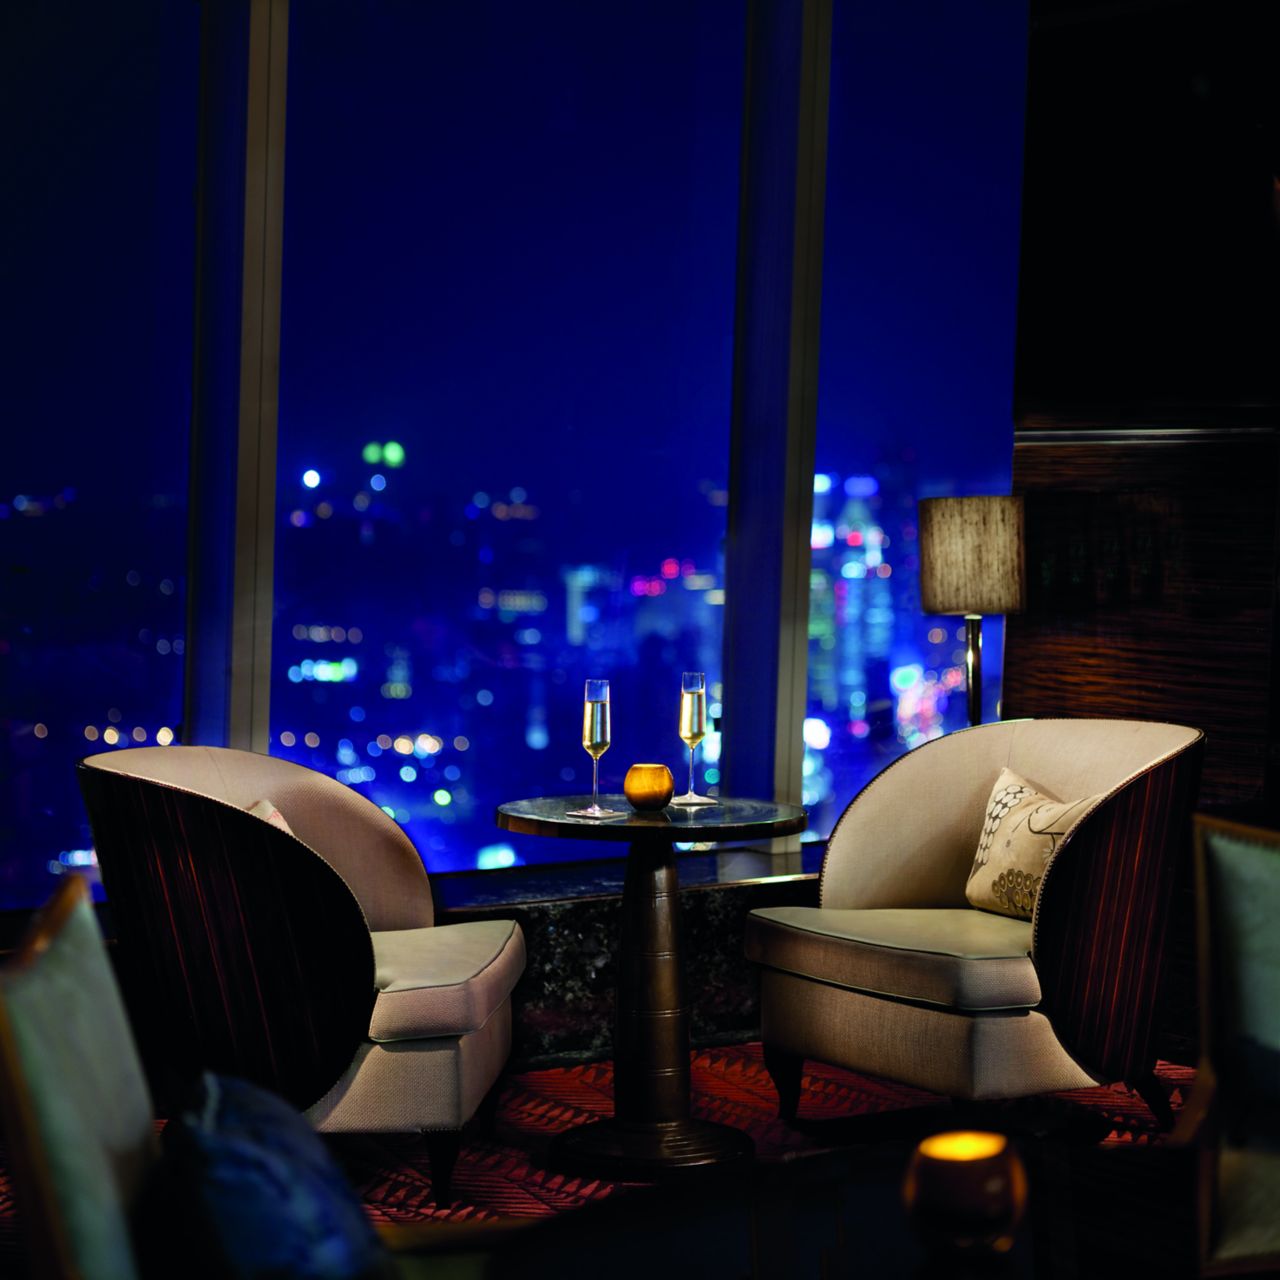 Two cocoon-like armchairs and a table with two glasses of champagne set next to large windows with evening city views